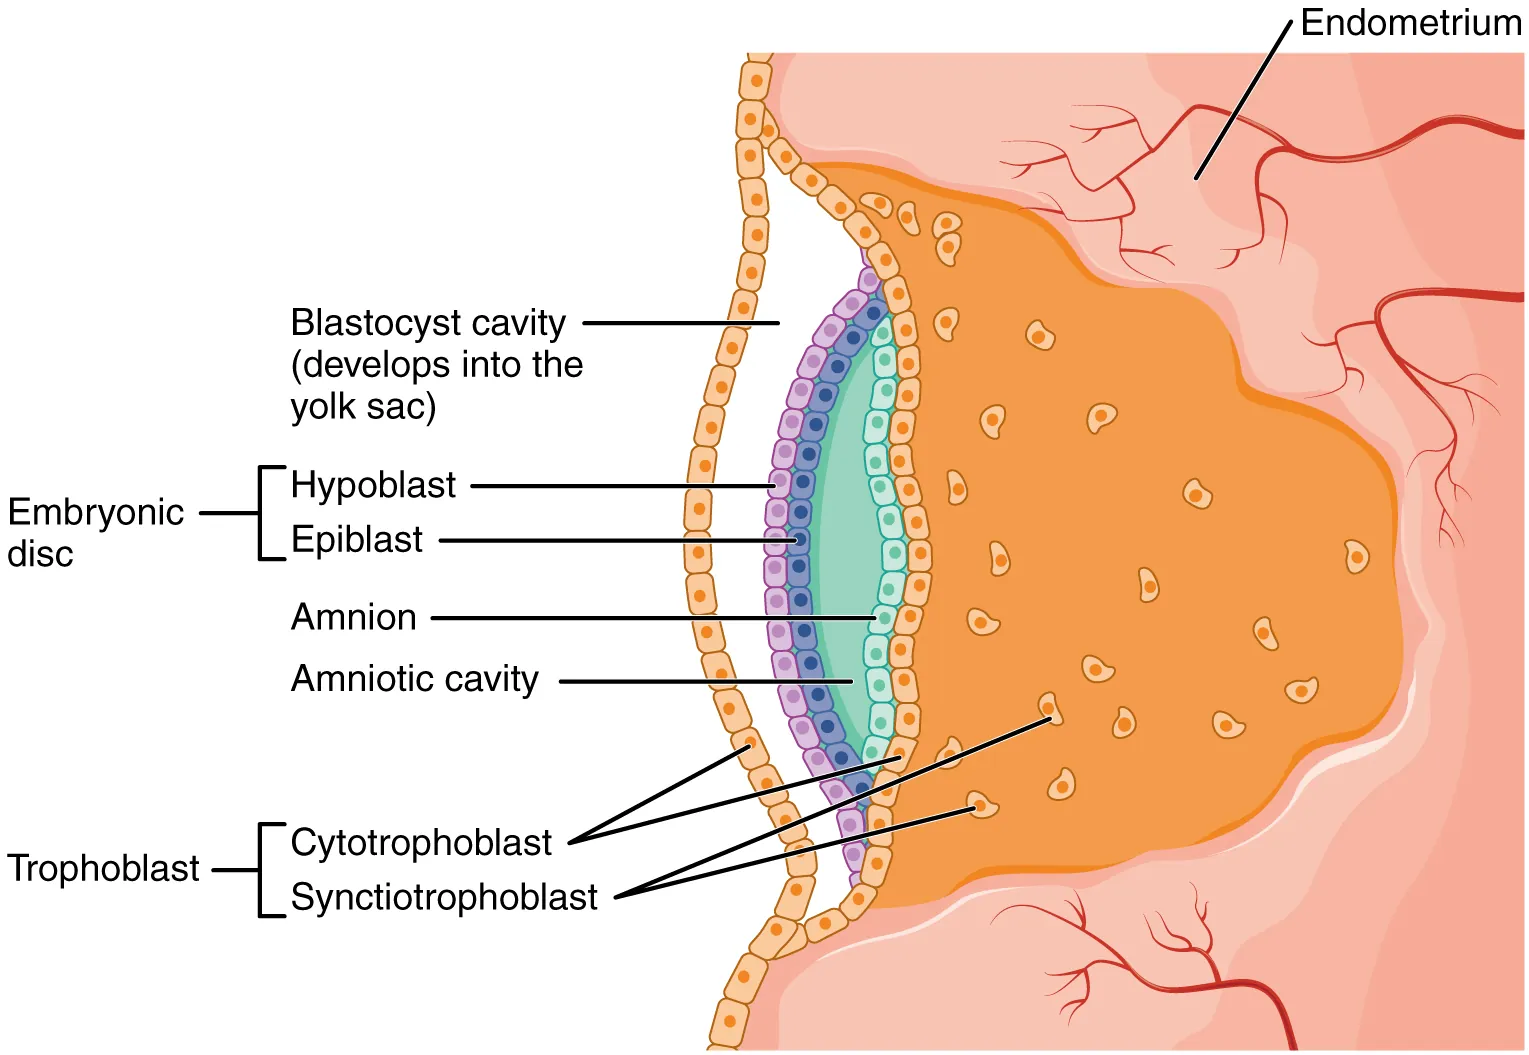 This image shows the development of the amniotic cavity and the location of the embryonic disc.